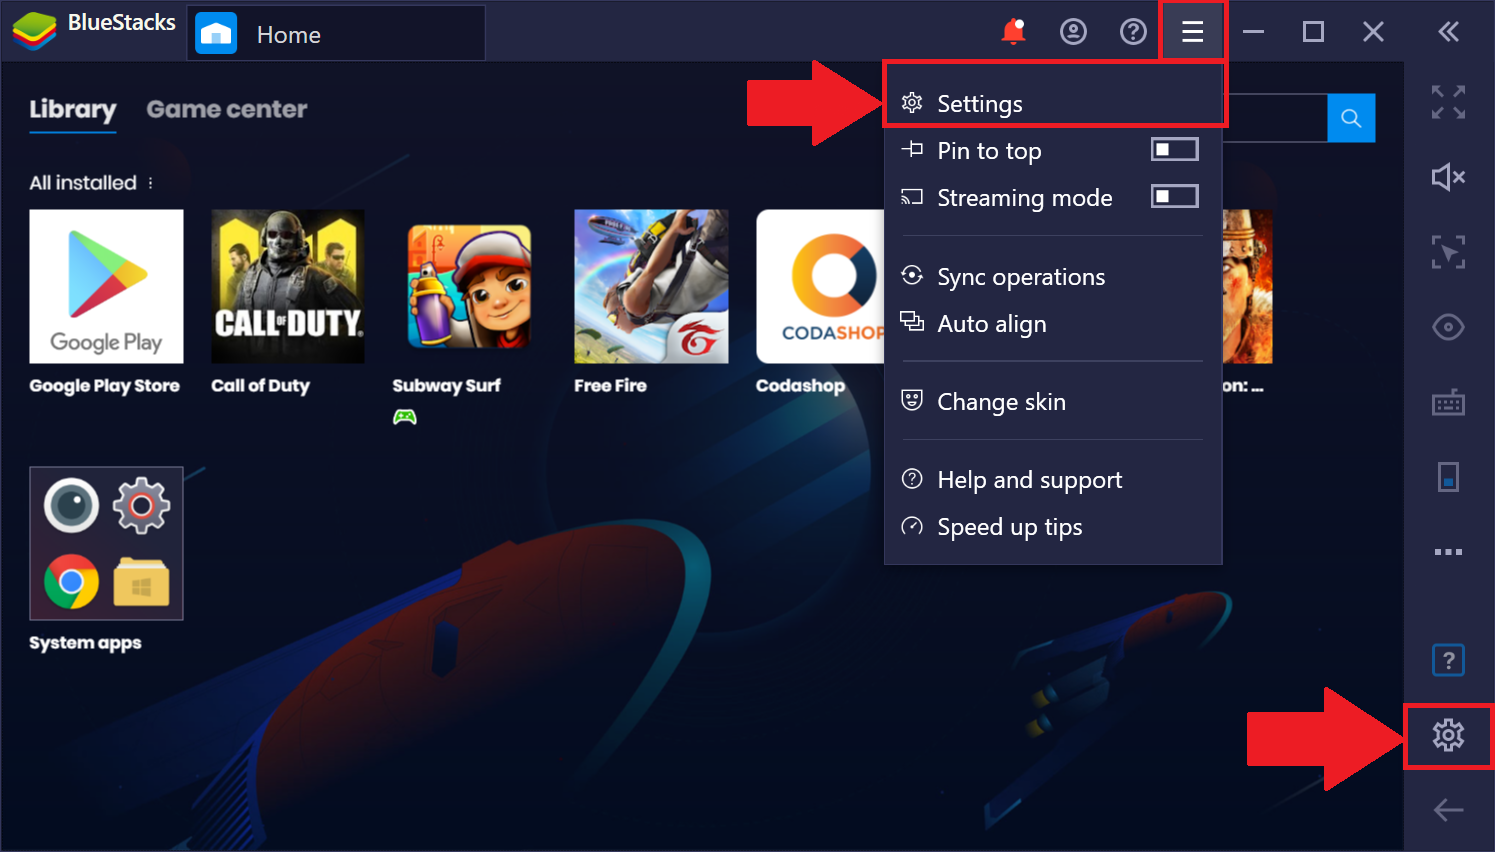 How To Create Desktop Shortcuts For Your Apps On Bluestacks 4 Bluestacks Support